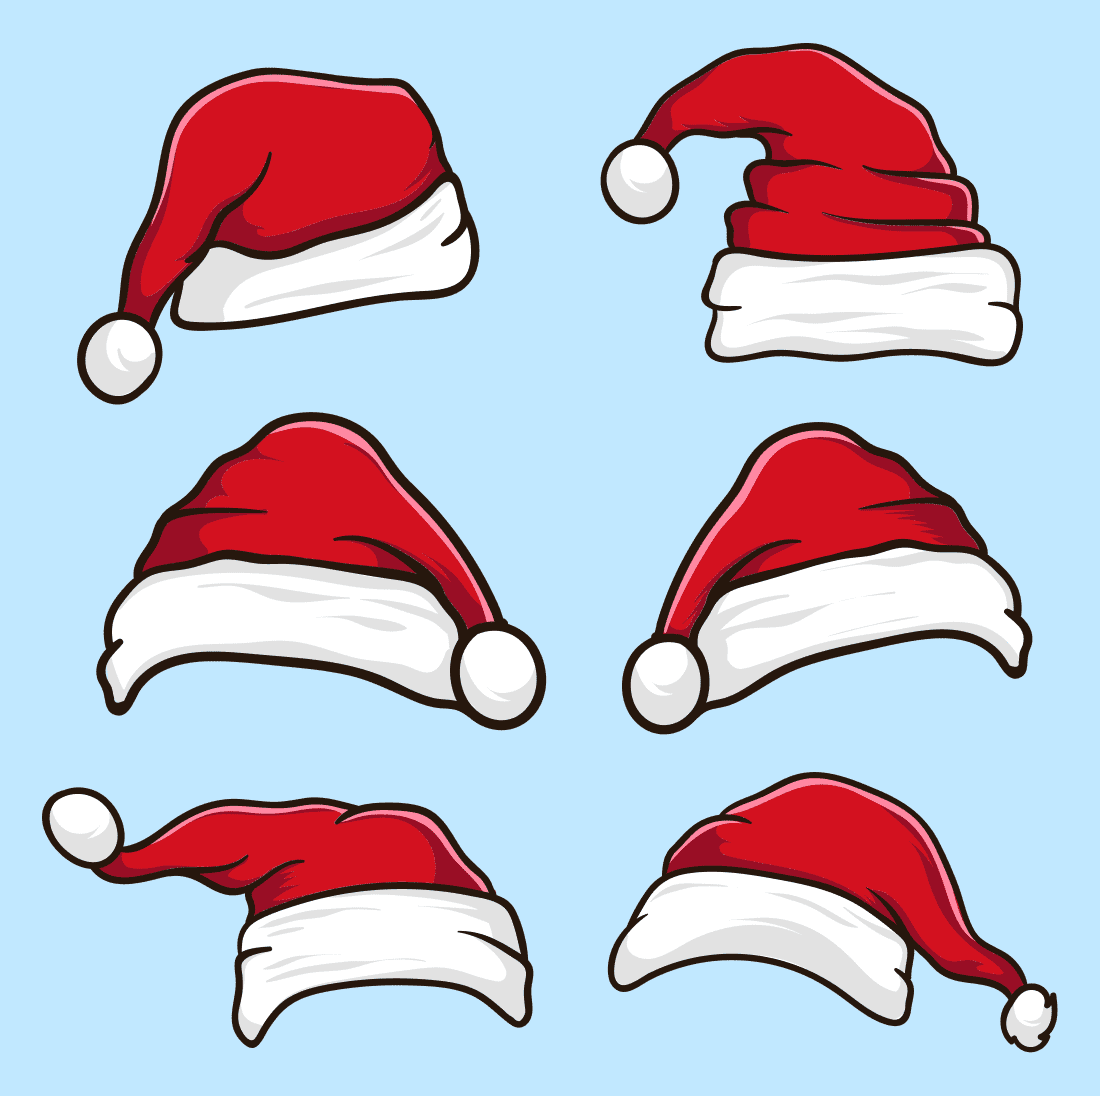 An image of a Santa hat with a white bauble.